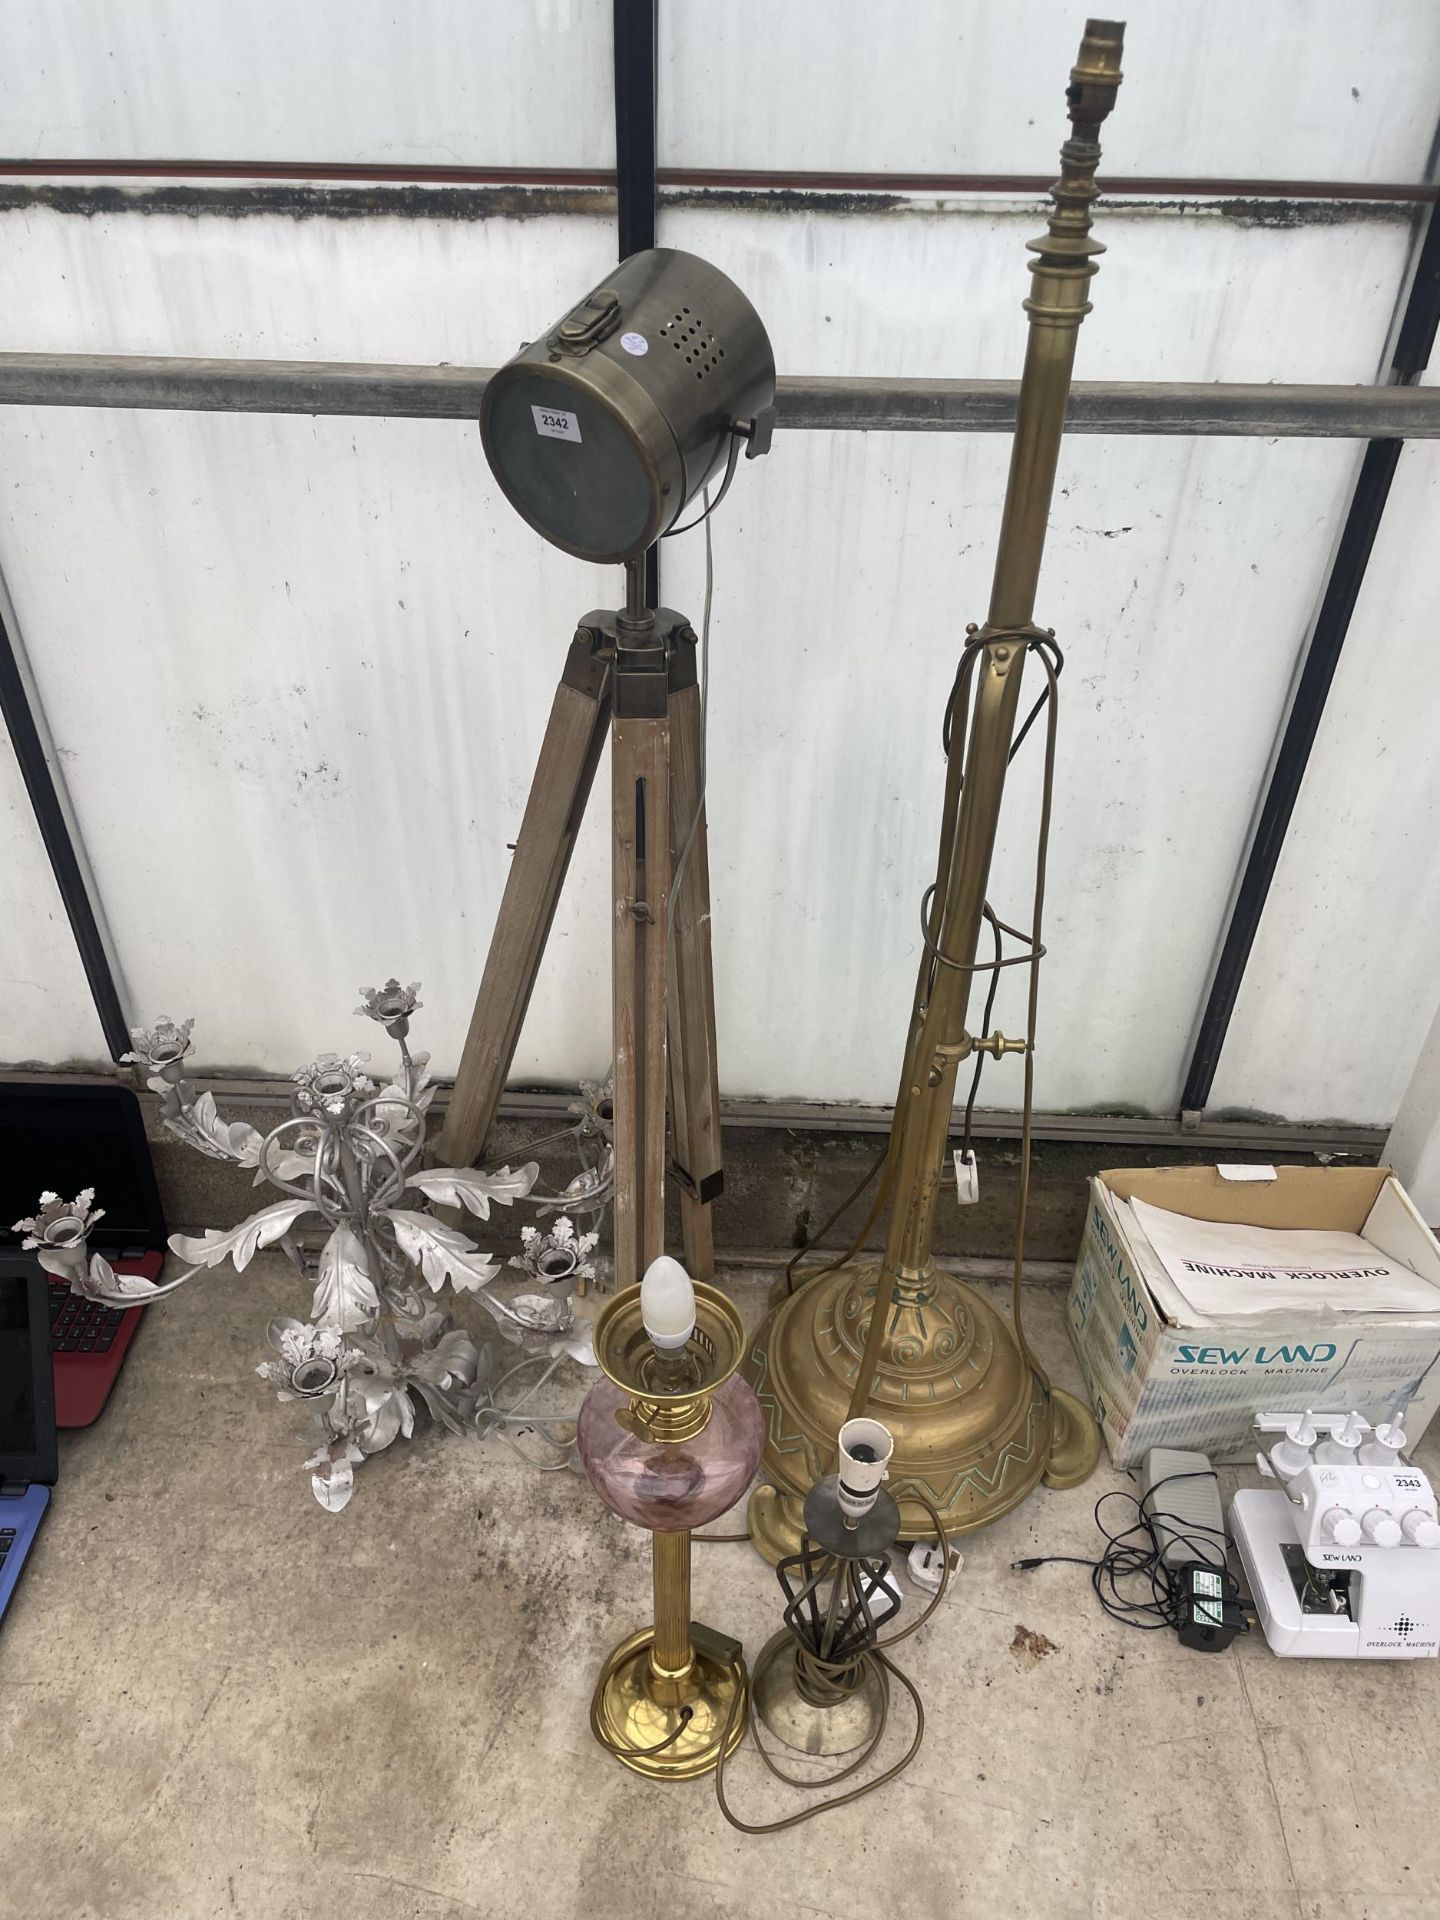 AN ASSORTMENT OF LAMPS AND LIGHT FITTINGS TO INCLUDE A TRIPOD SPOT LAMP AND A BRASS STANDARD LAMP